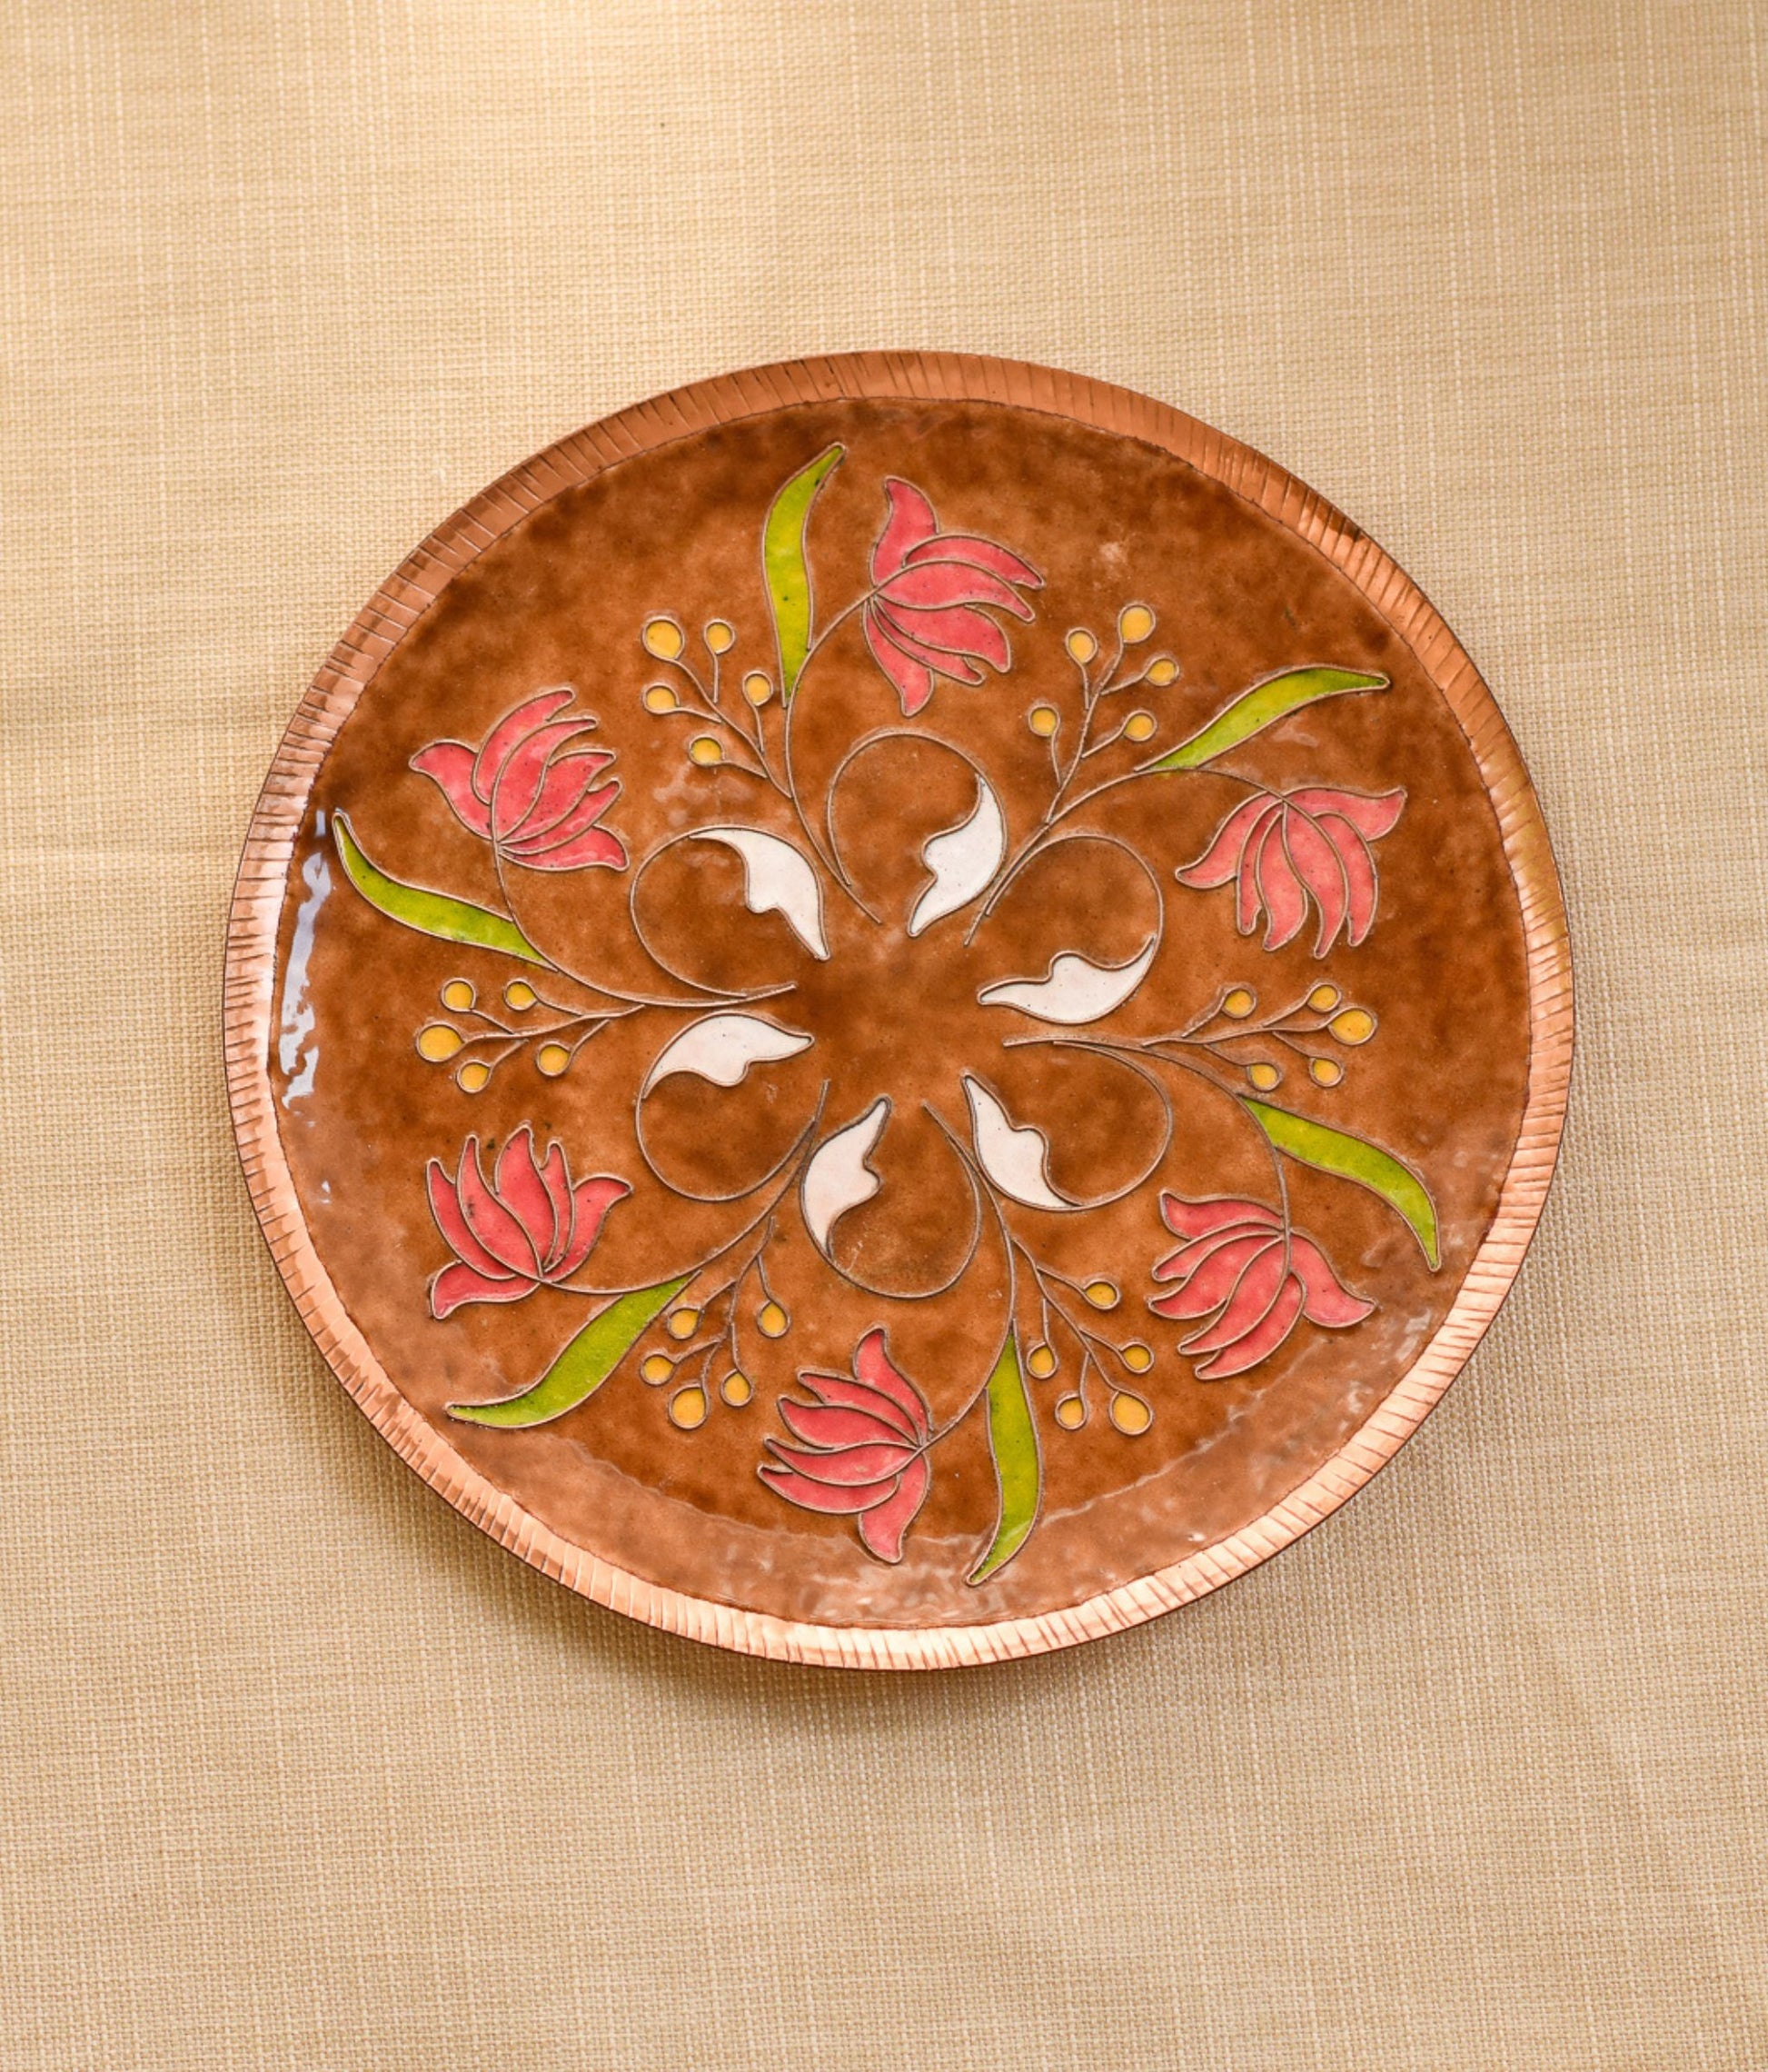 Peerless Wall Plate Decor  Collection Of Copper Plates